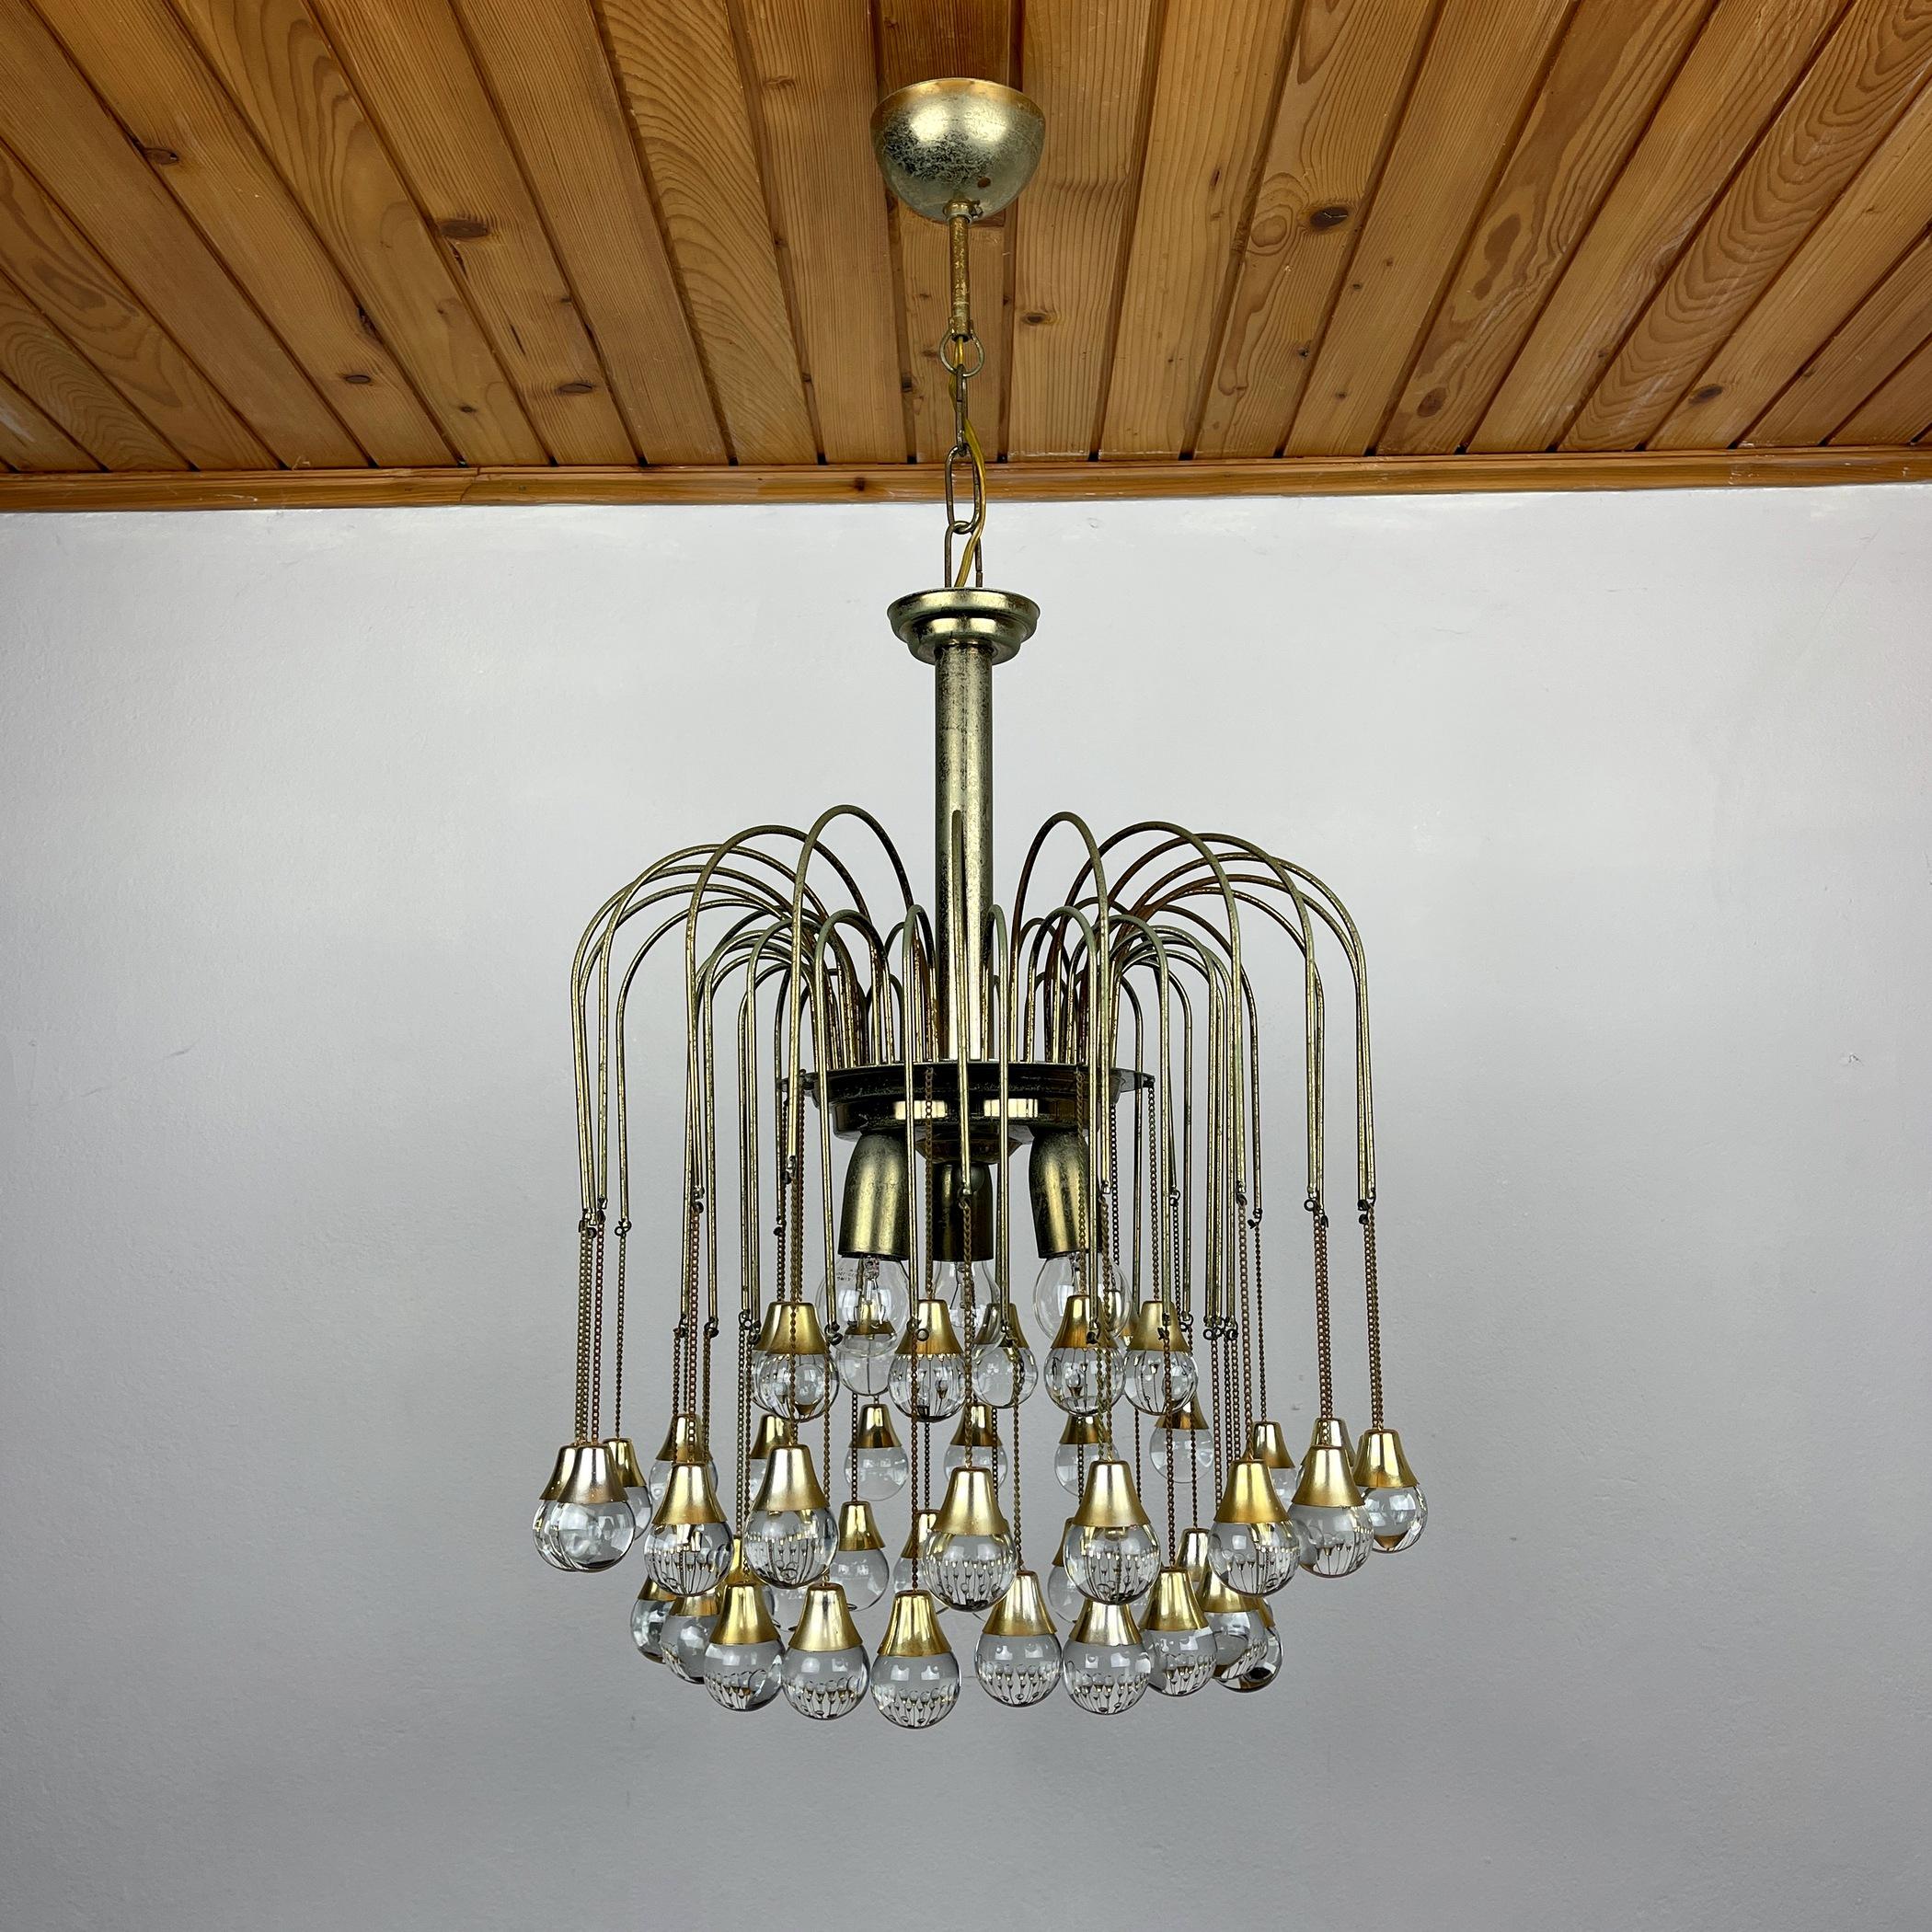 Italian Vintage Cascade Glass Chandelier Italy 1960s Brass and 48 Glass Balls